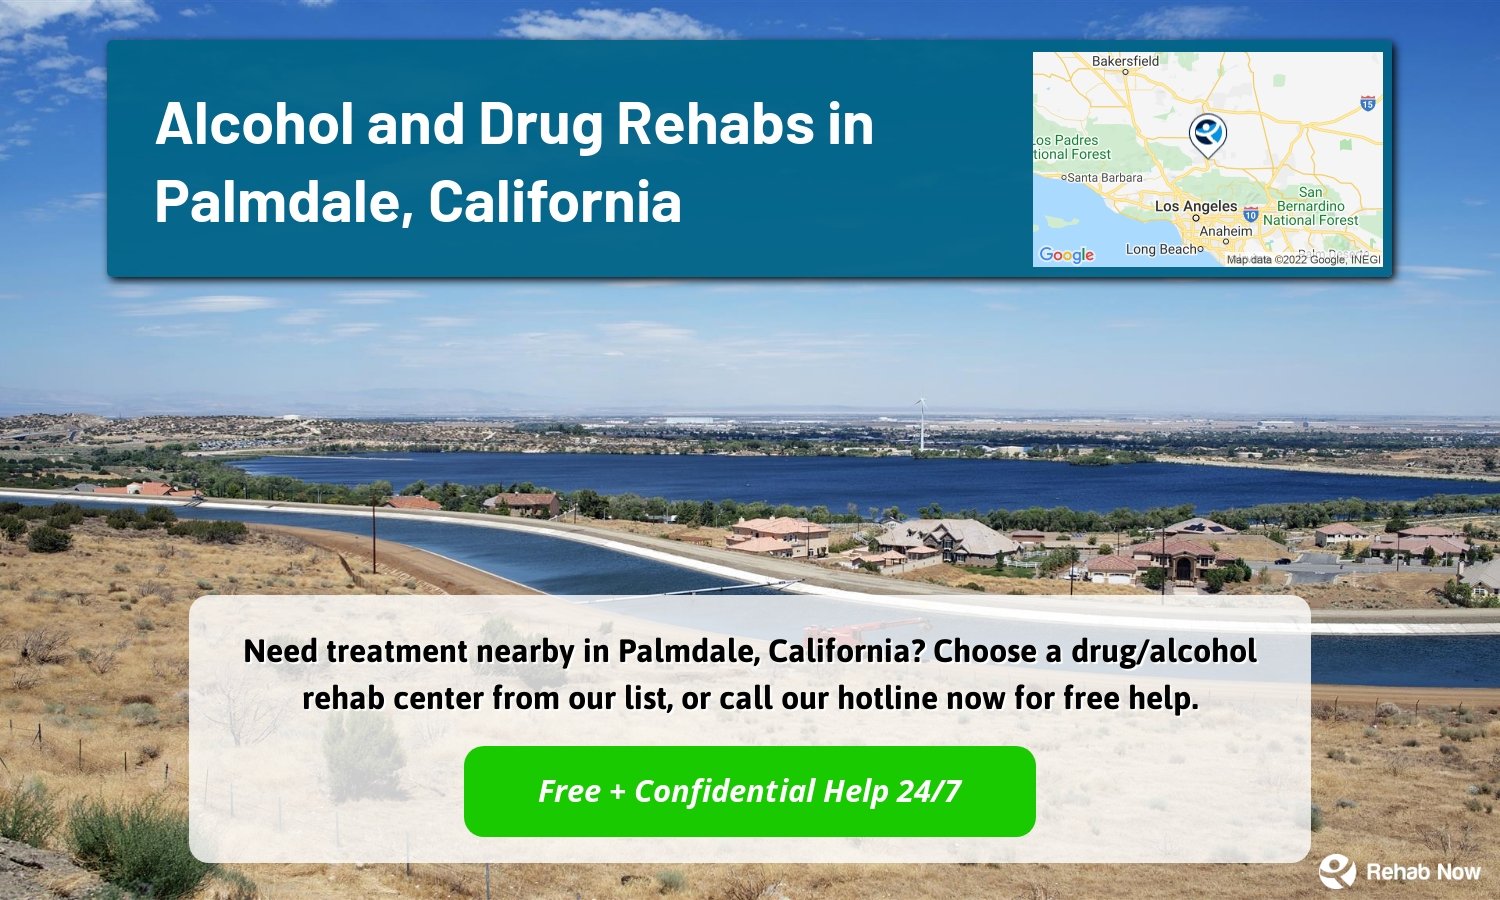 Need treatment nearby in Palmdale, California? Choose a drug/alcohol rehab center from our list, or call our hotline now for free help.